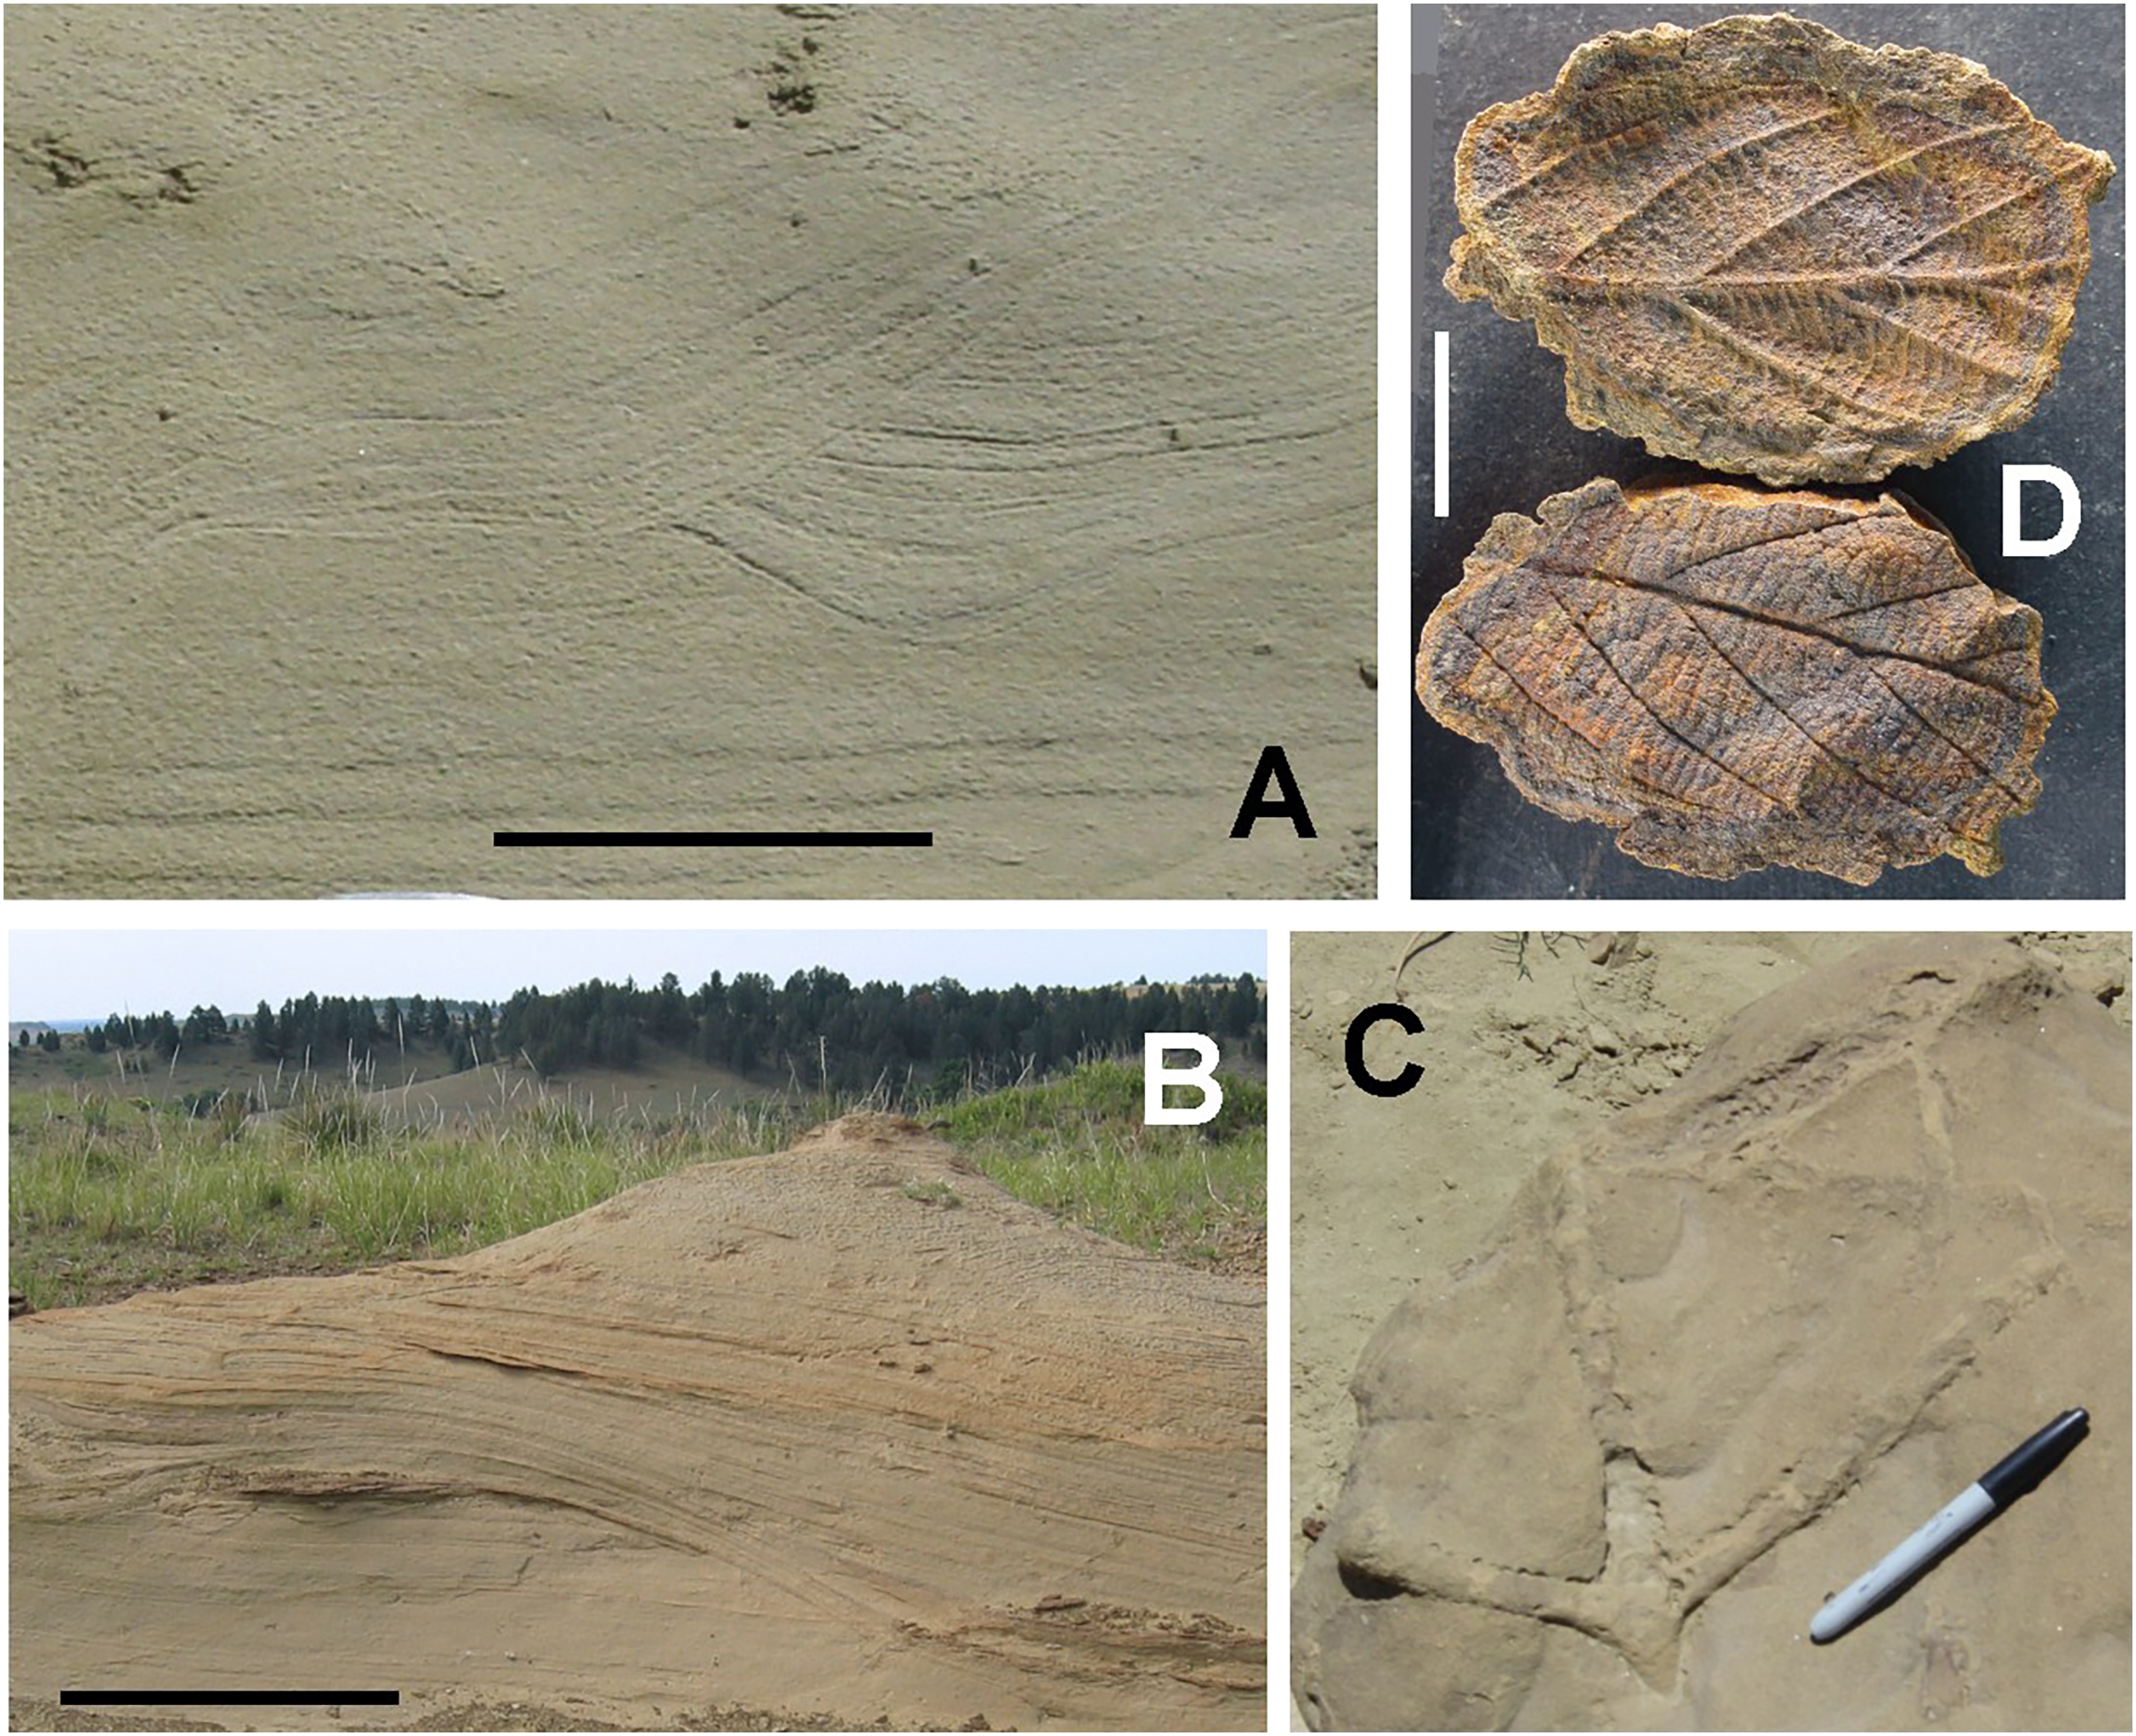 PDF) REPLACEMENT OF IRON SULPHIDES BY OXIDES IN THE DINOSAUR BONE FROM THE LANCE  FM. (WYOMING, USA) – PRELIMINARY STUDY